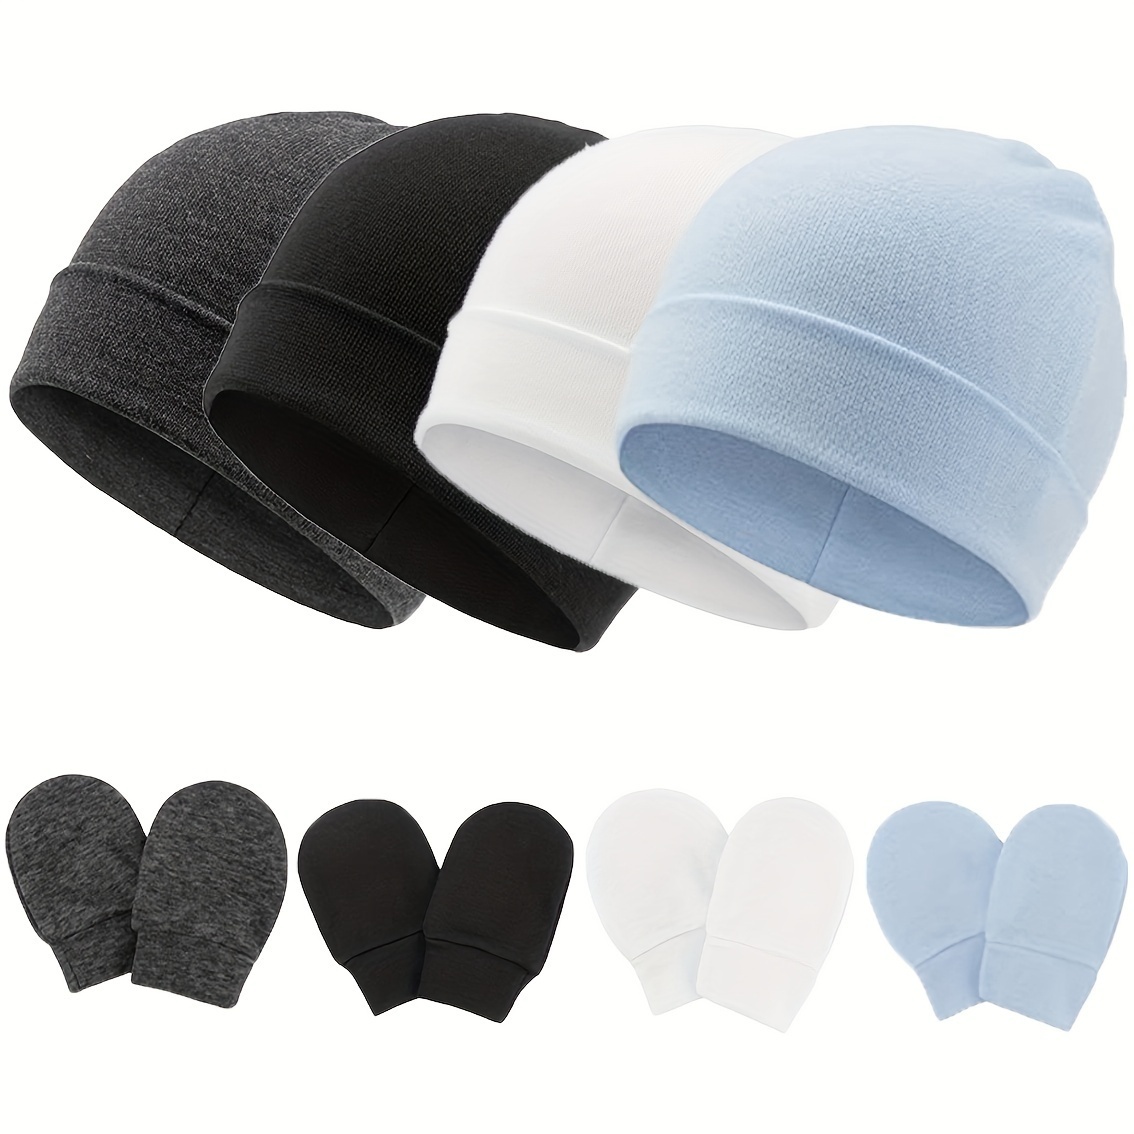 

4 Sets Of Cute Caps & Gloves - Perfect For Outdoor Activities For Newborn Babies, Ideal Choice For Gifts